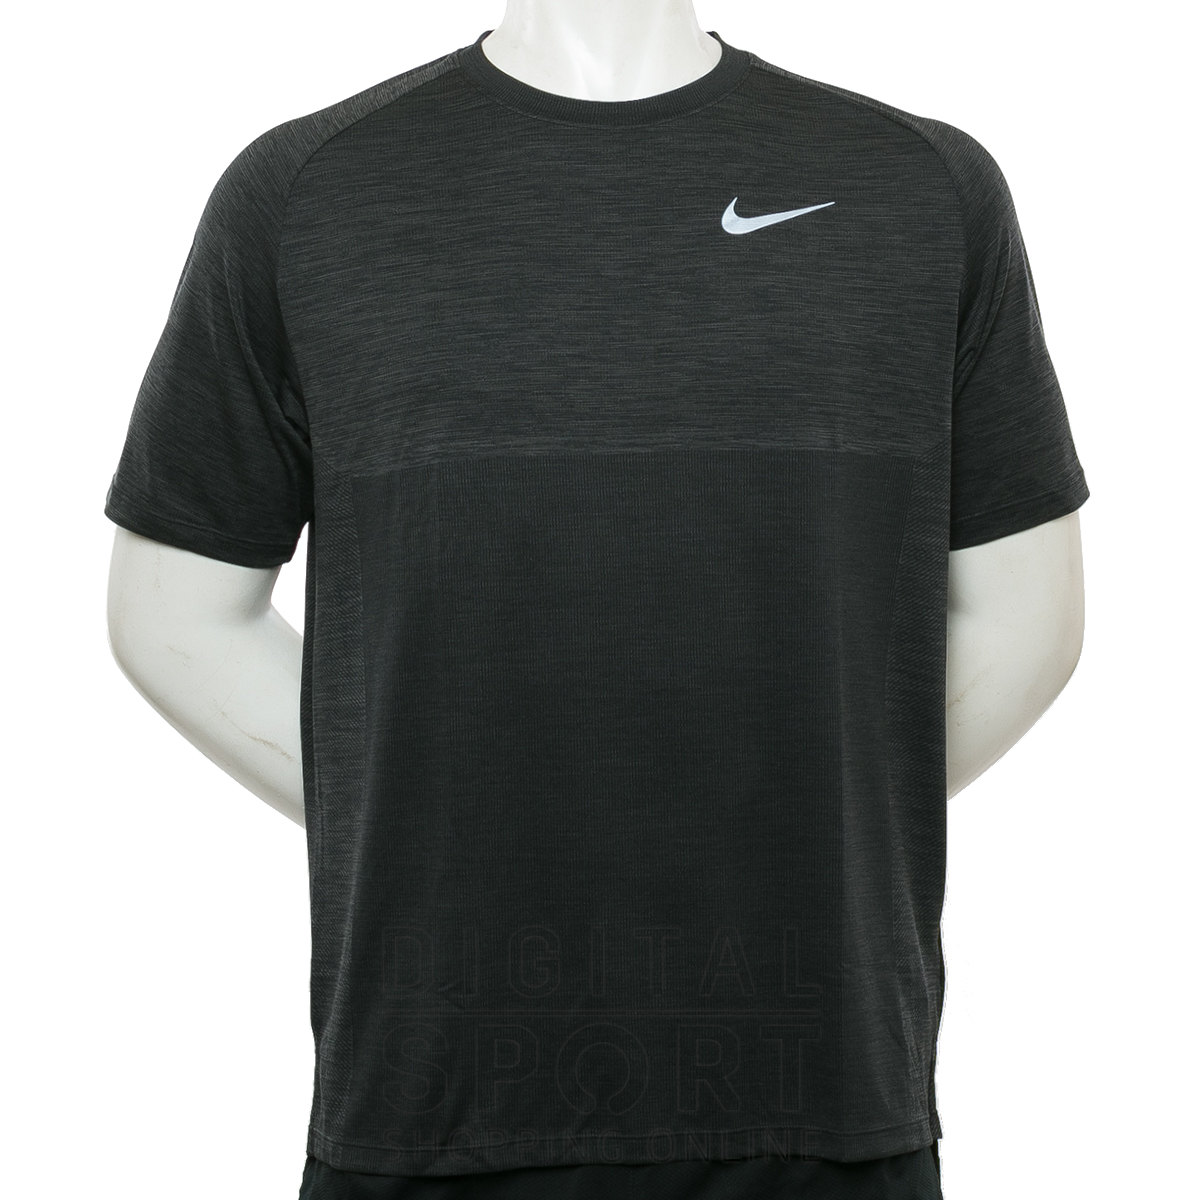 REMERA DRY-FIT MEDALIST NIKE | HOT SALE